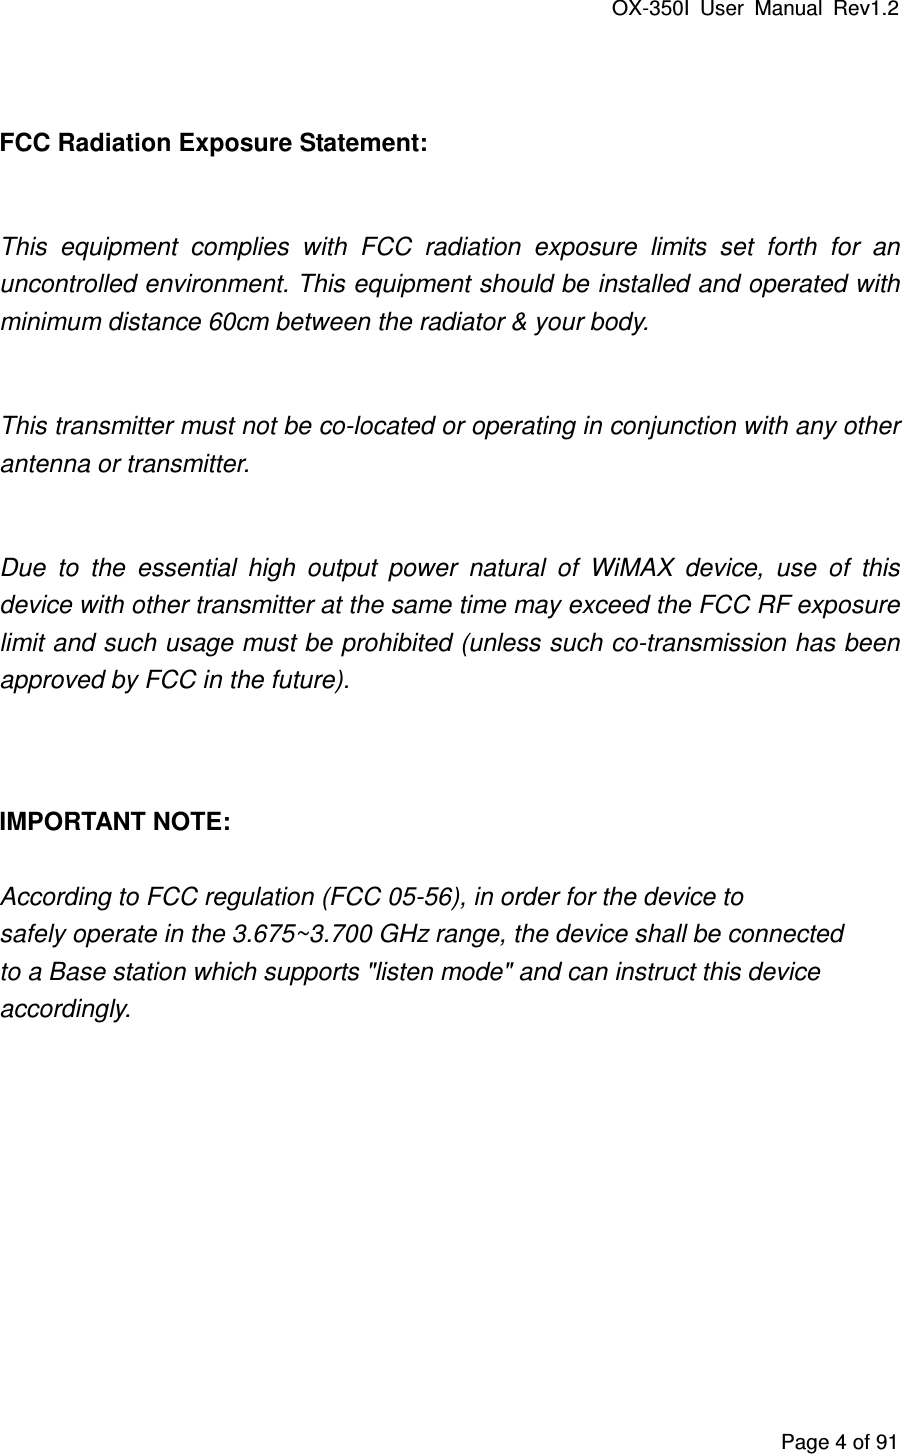 OX-350I  User  Manual  Rev1.2 Page 4 of 91  FCC Radiation Exposure Statement:  This  equipment  complies  with  FCC  radiation  exposure  limits  set  forth  for  an uncontrolled environment. This equipment should be installed and operated with minimum distance 60cm between the radiator &amp; your body.  This transmitter must not be co-located or operating in conjunction with any other antenna or transmitter.  Due  to  the  essential  high  output  power  natural  of  WiMAX  device,  use  of  this device with other transmitter at the same time may exceed the FCC RF exposure limit and such usage must be prohibited (unless such co-transmission has been approved by FCC in the future).   IMPORTANT NOTE:  According to FCC regulation (FCC 05-56), in order for the device to safely operate in the 3.675~3.700 GHz range, the device shall be connected to a Base station which supports &quot;listen mode&quot; and can instruct this device accordingly.  